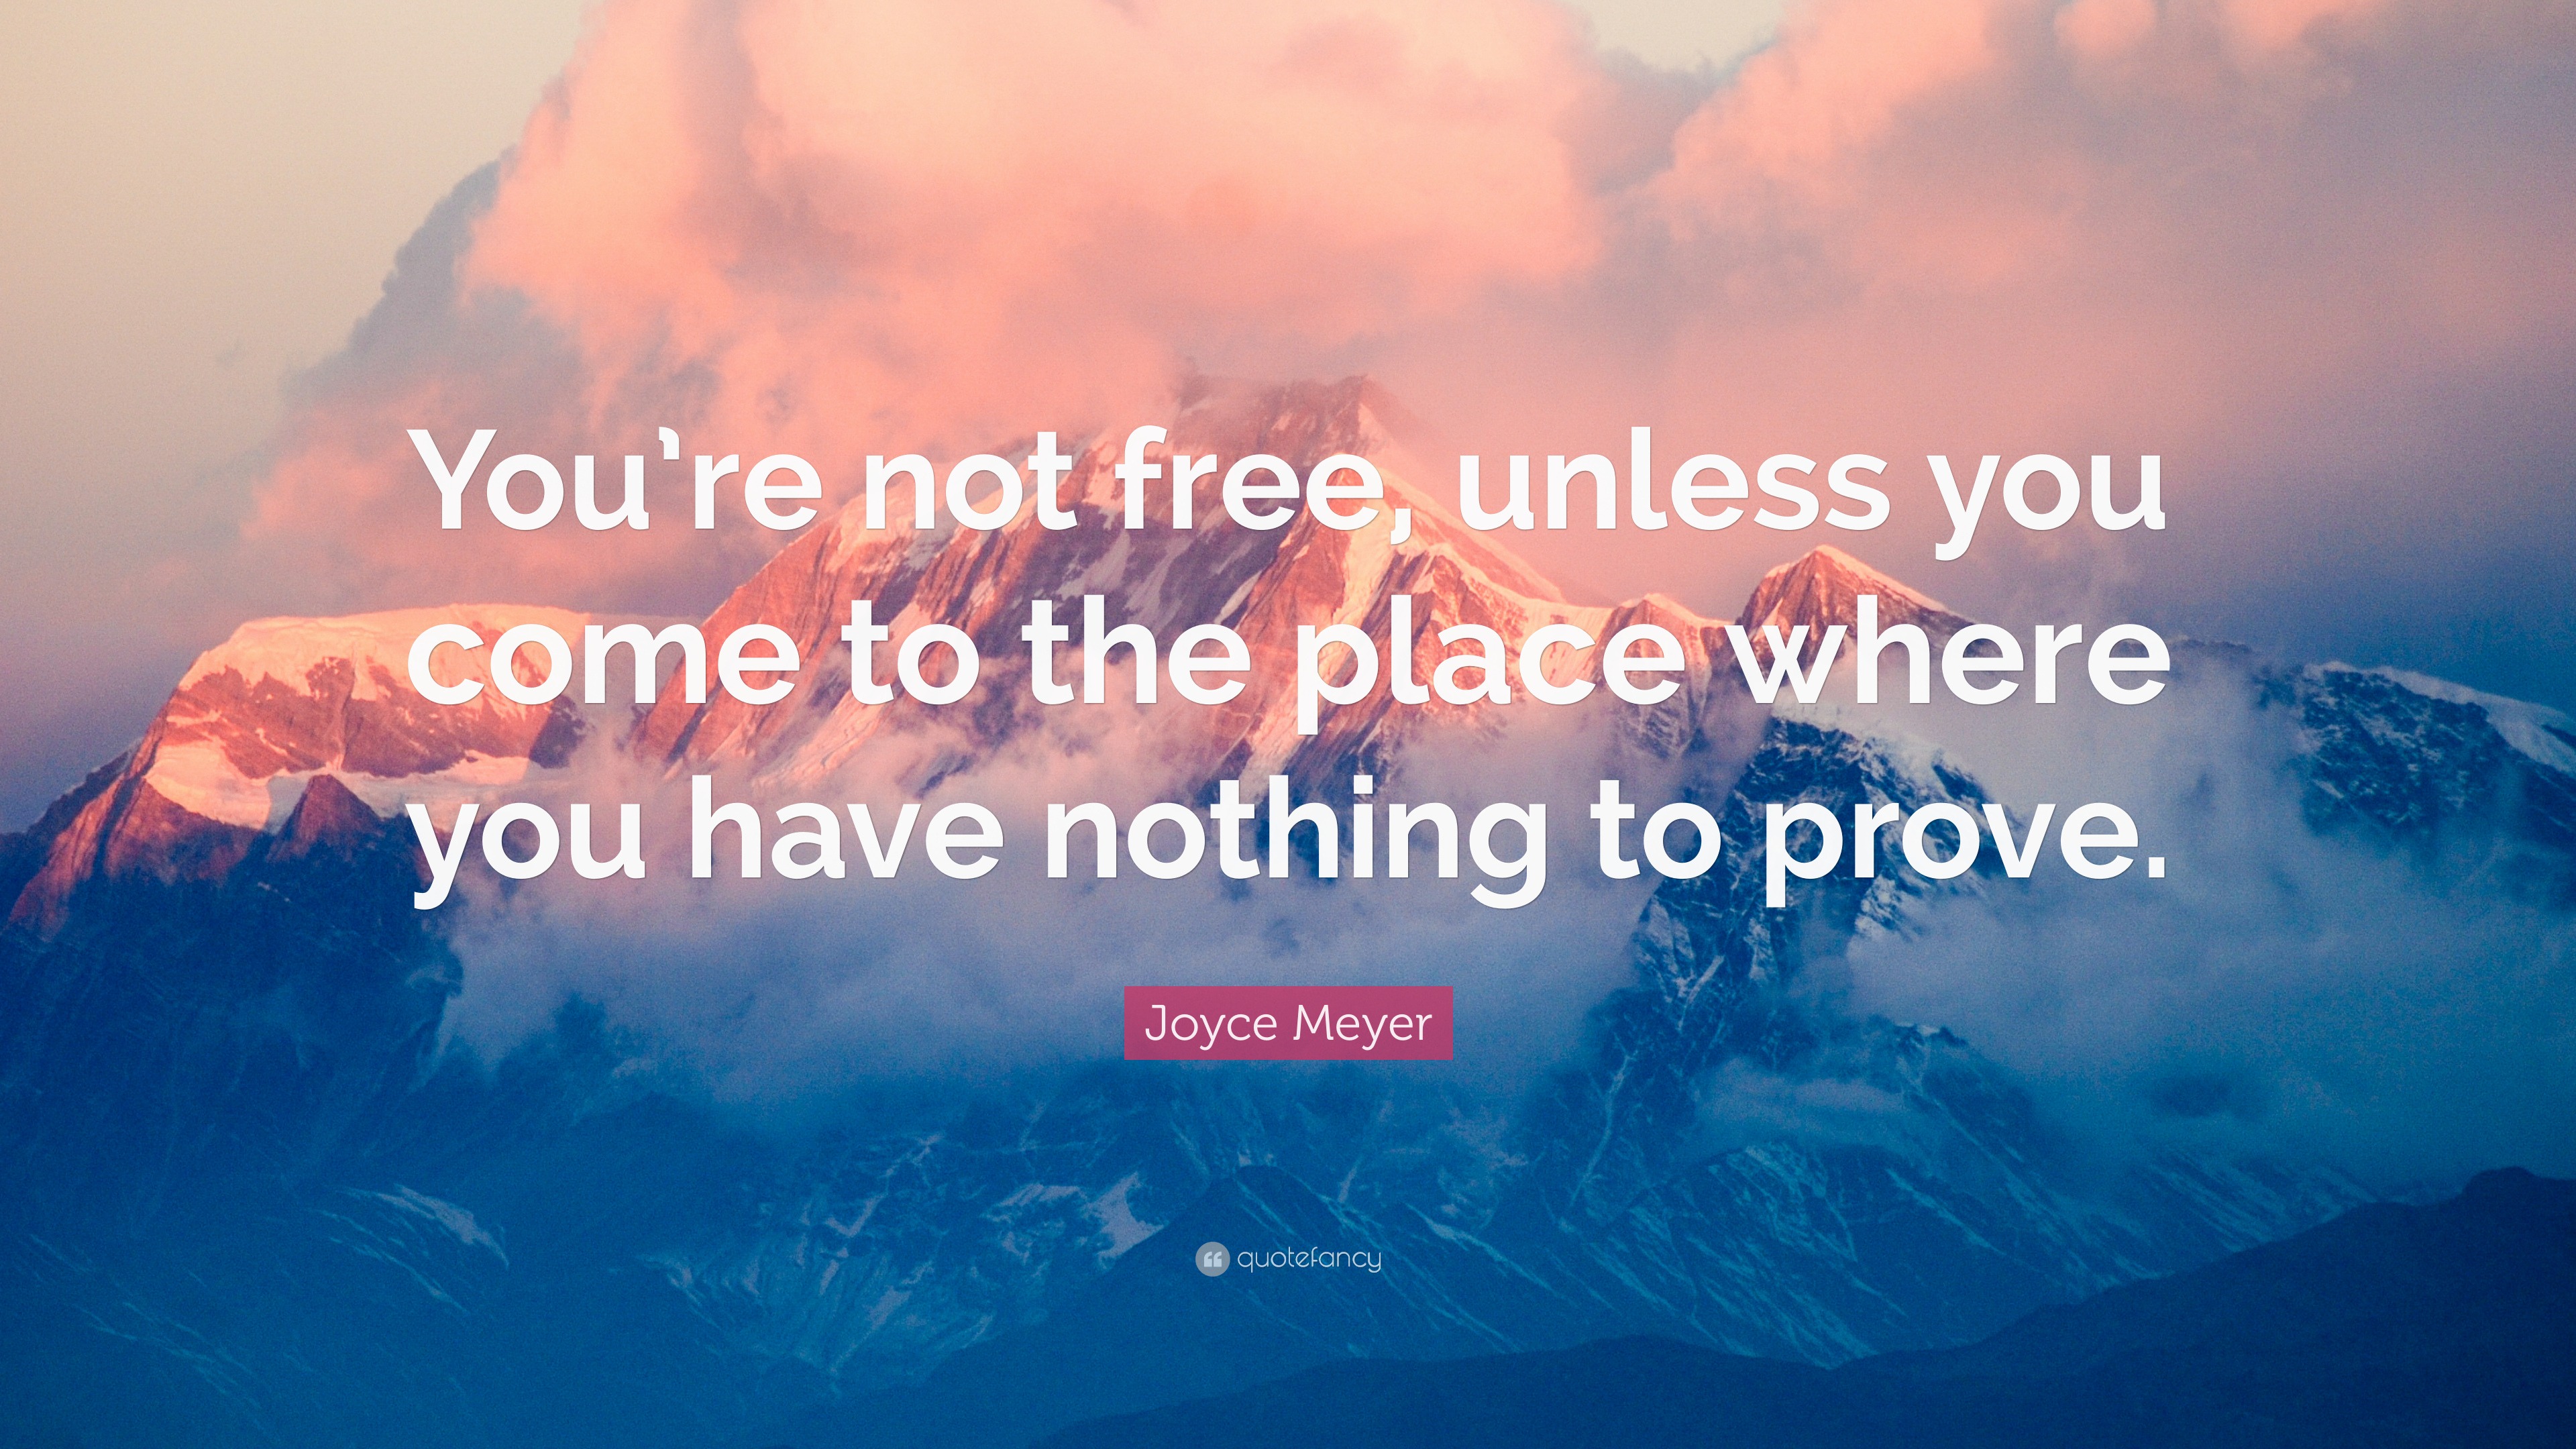 Nothing Comes for Free, Unless it really is …